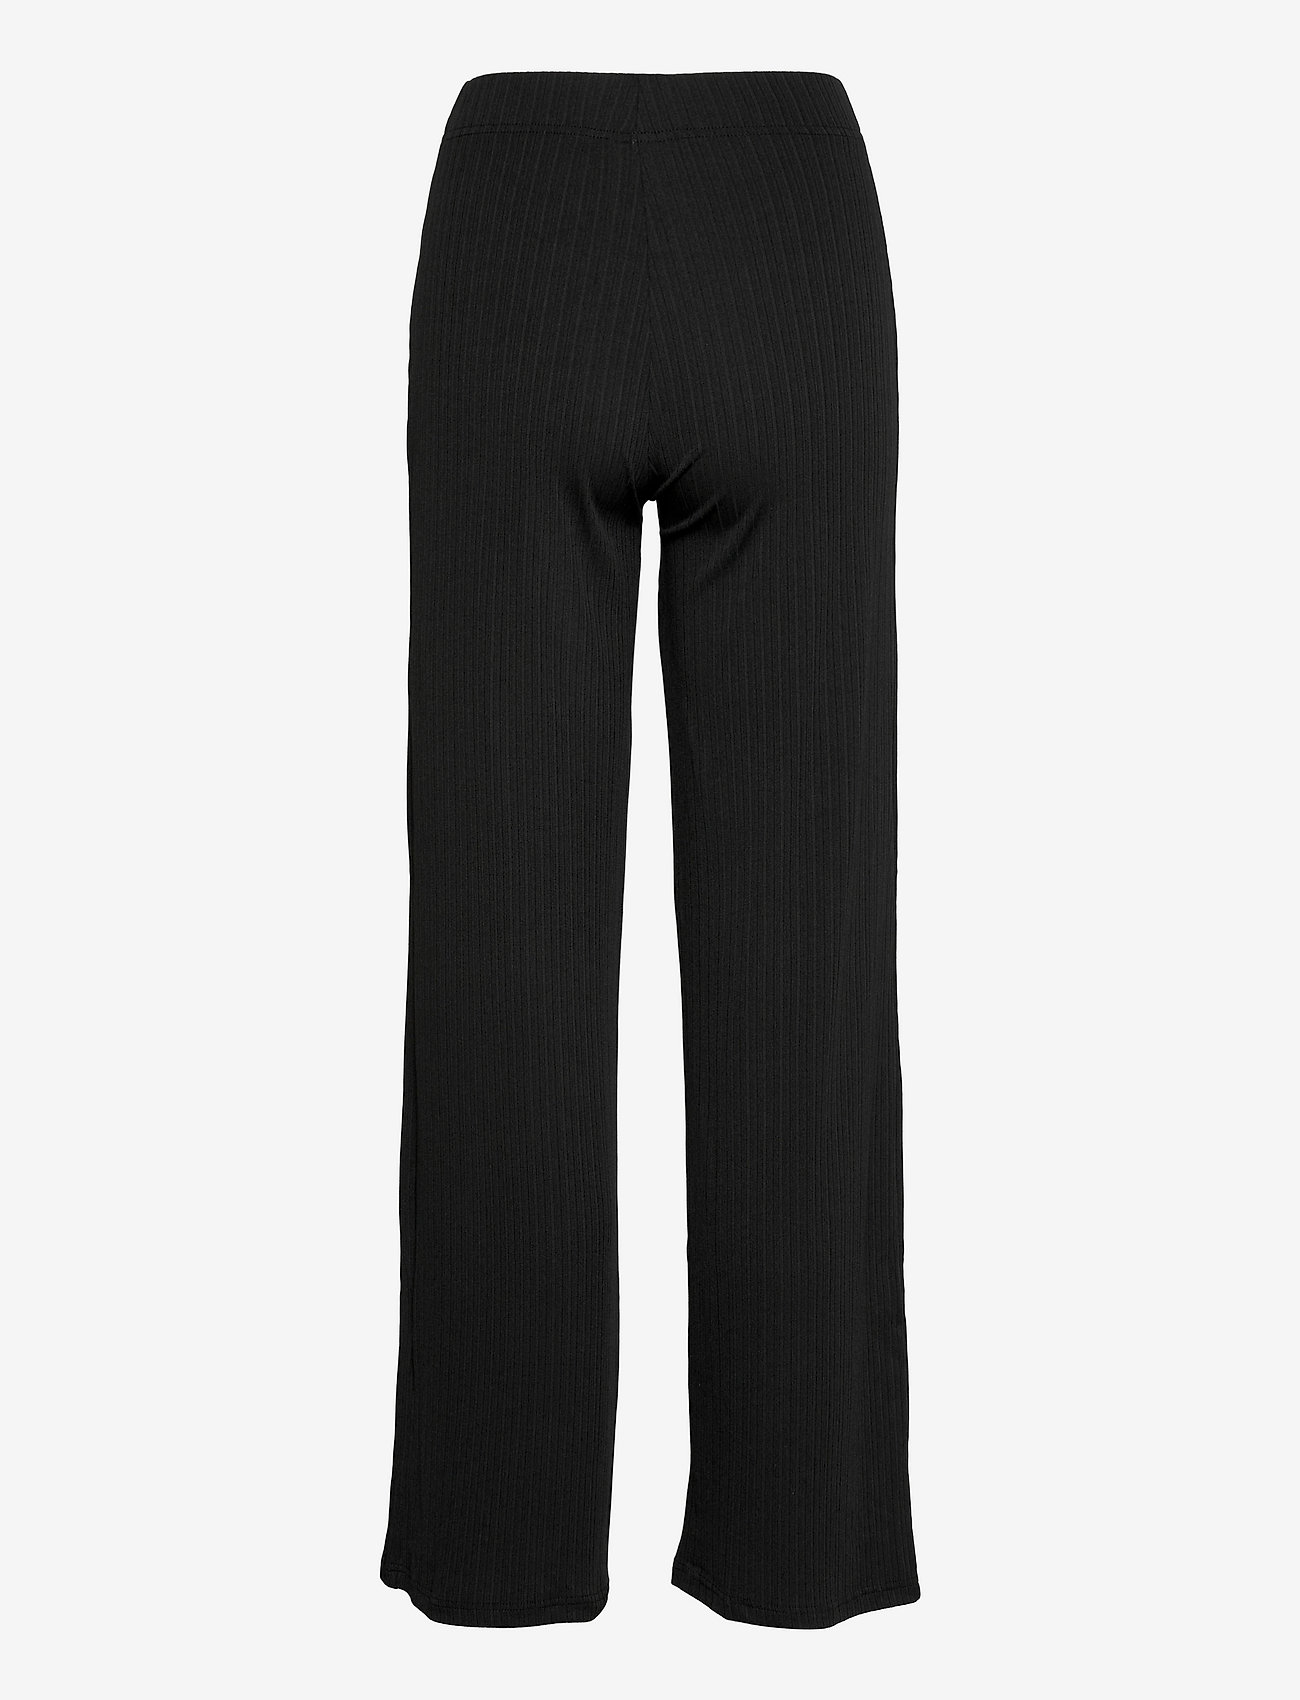 Gina Tricot - Edit trousers - formell - black (9000) - 1